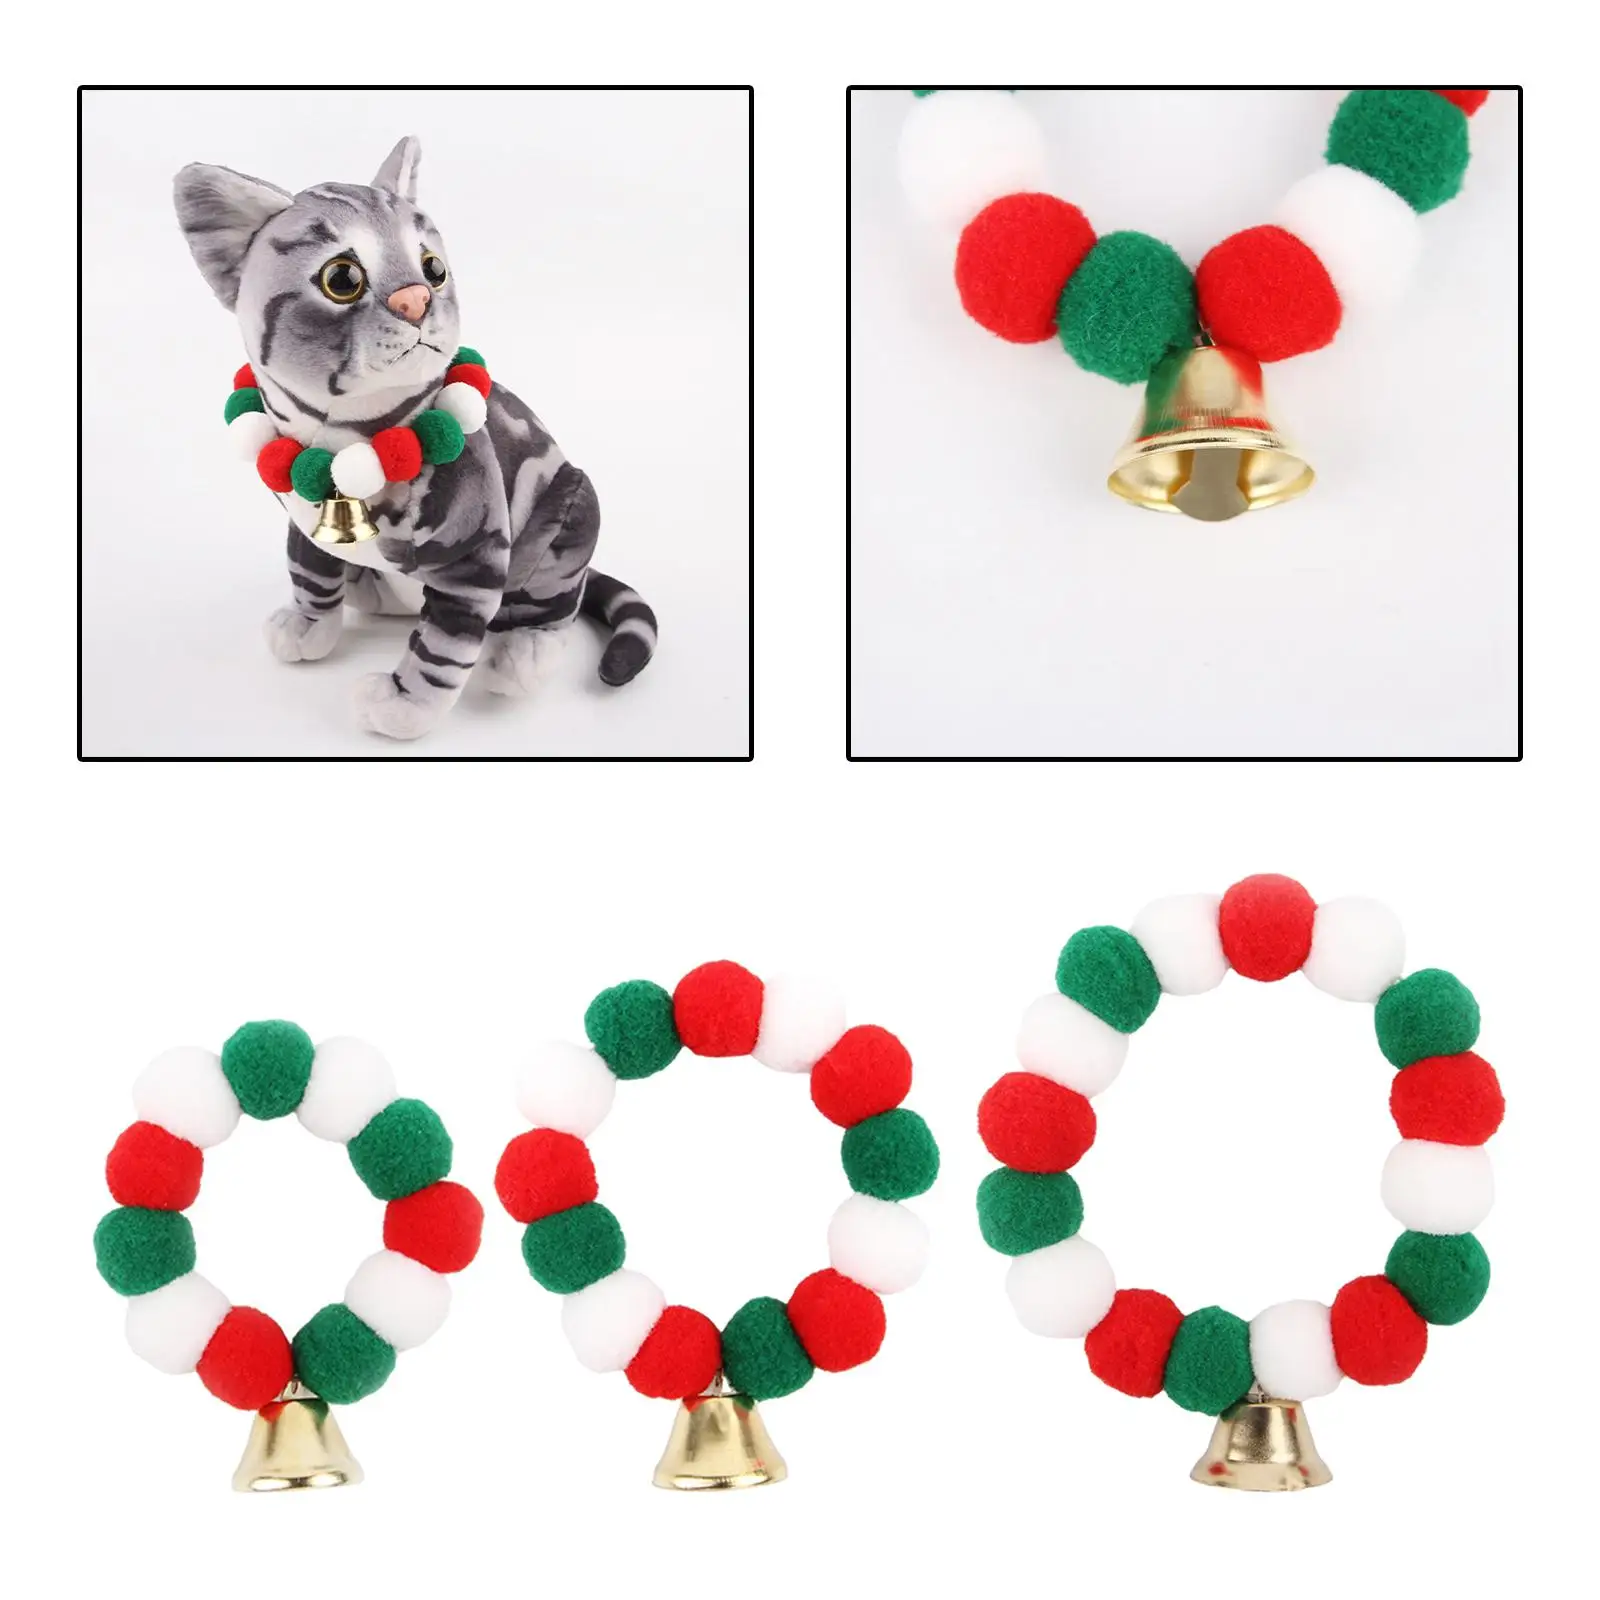 Plush Balls Puppy Necklace Collar Adorable Decorative Pet Collar Necklace with Bells for Walking Outdoor Sports Party Supplies